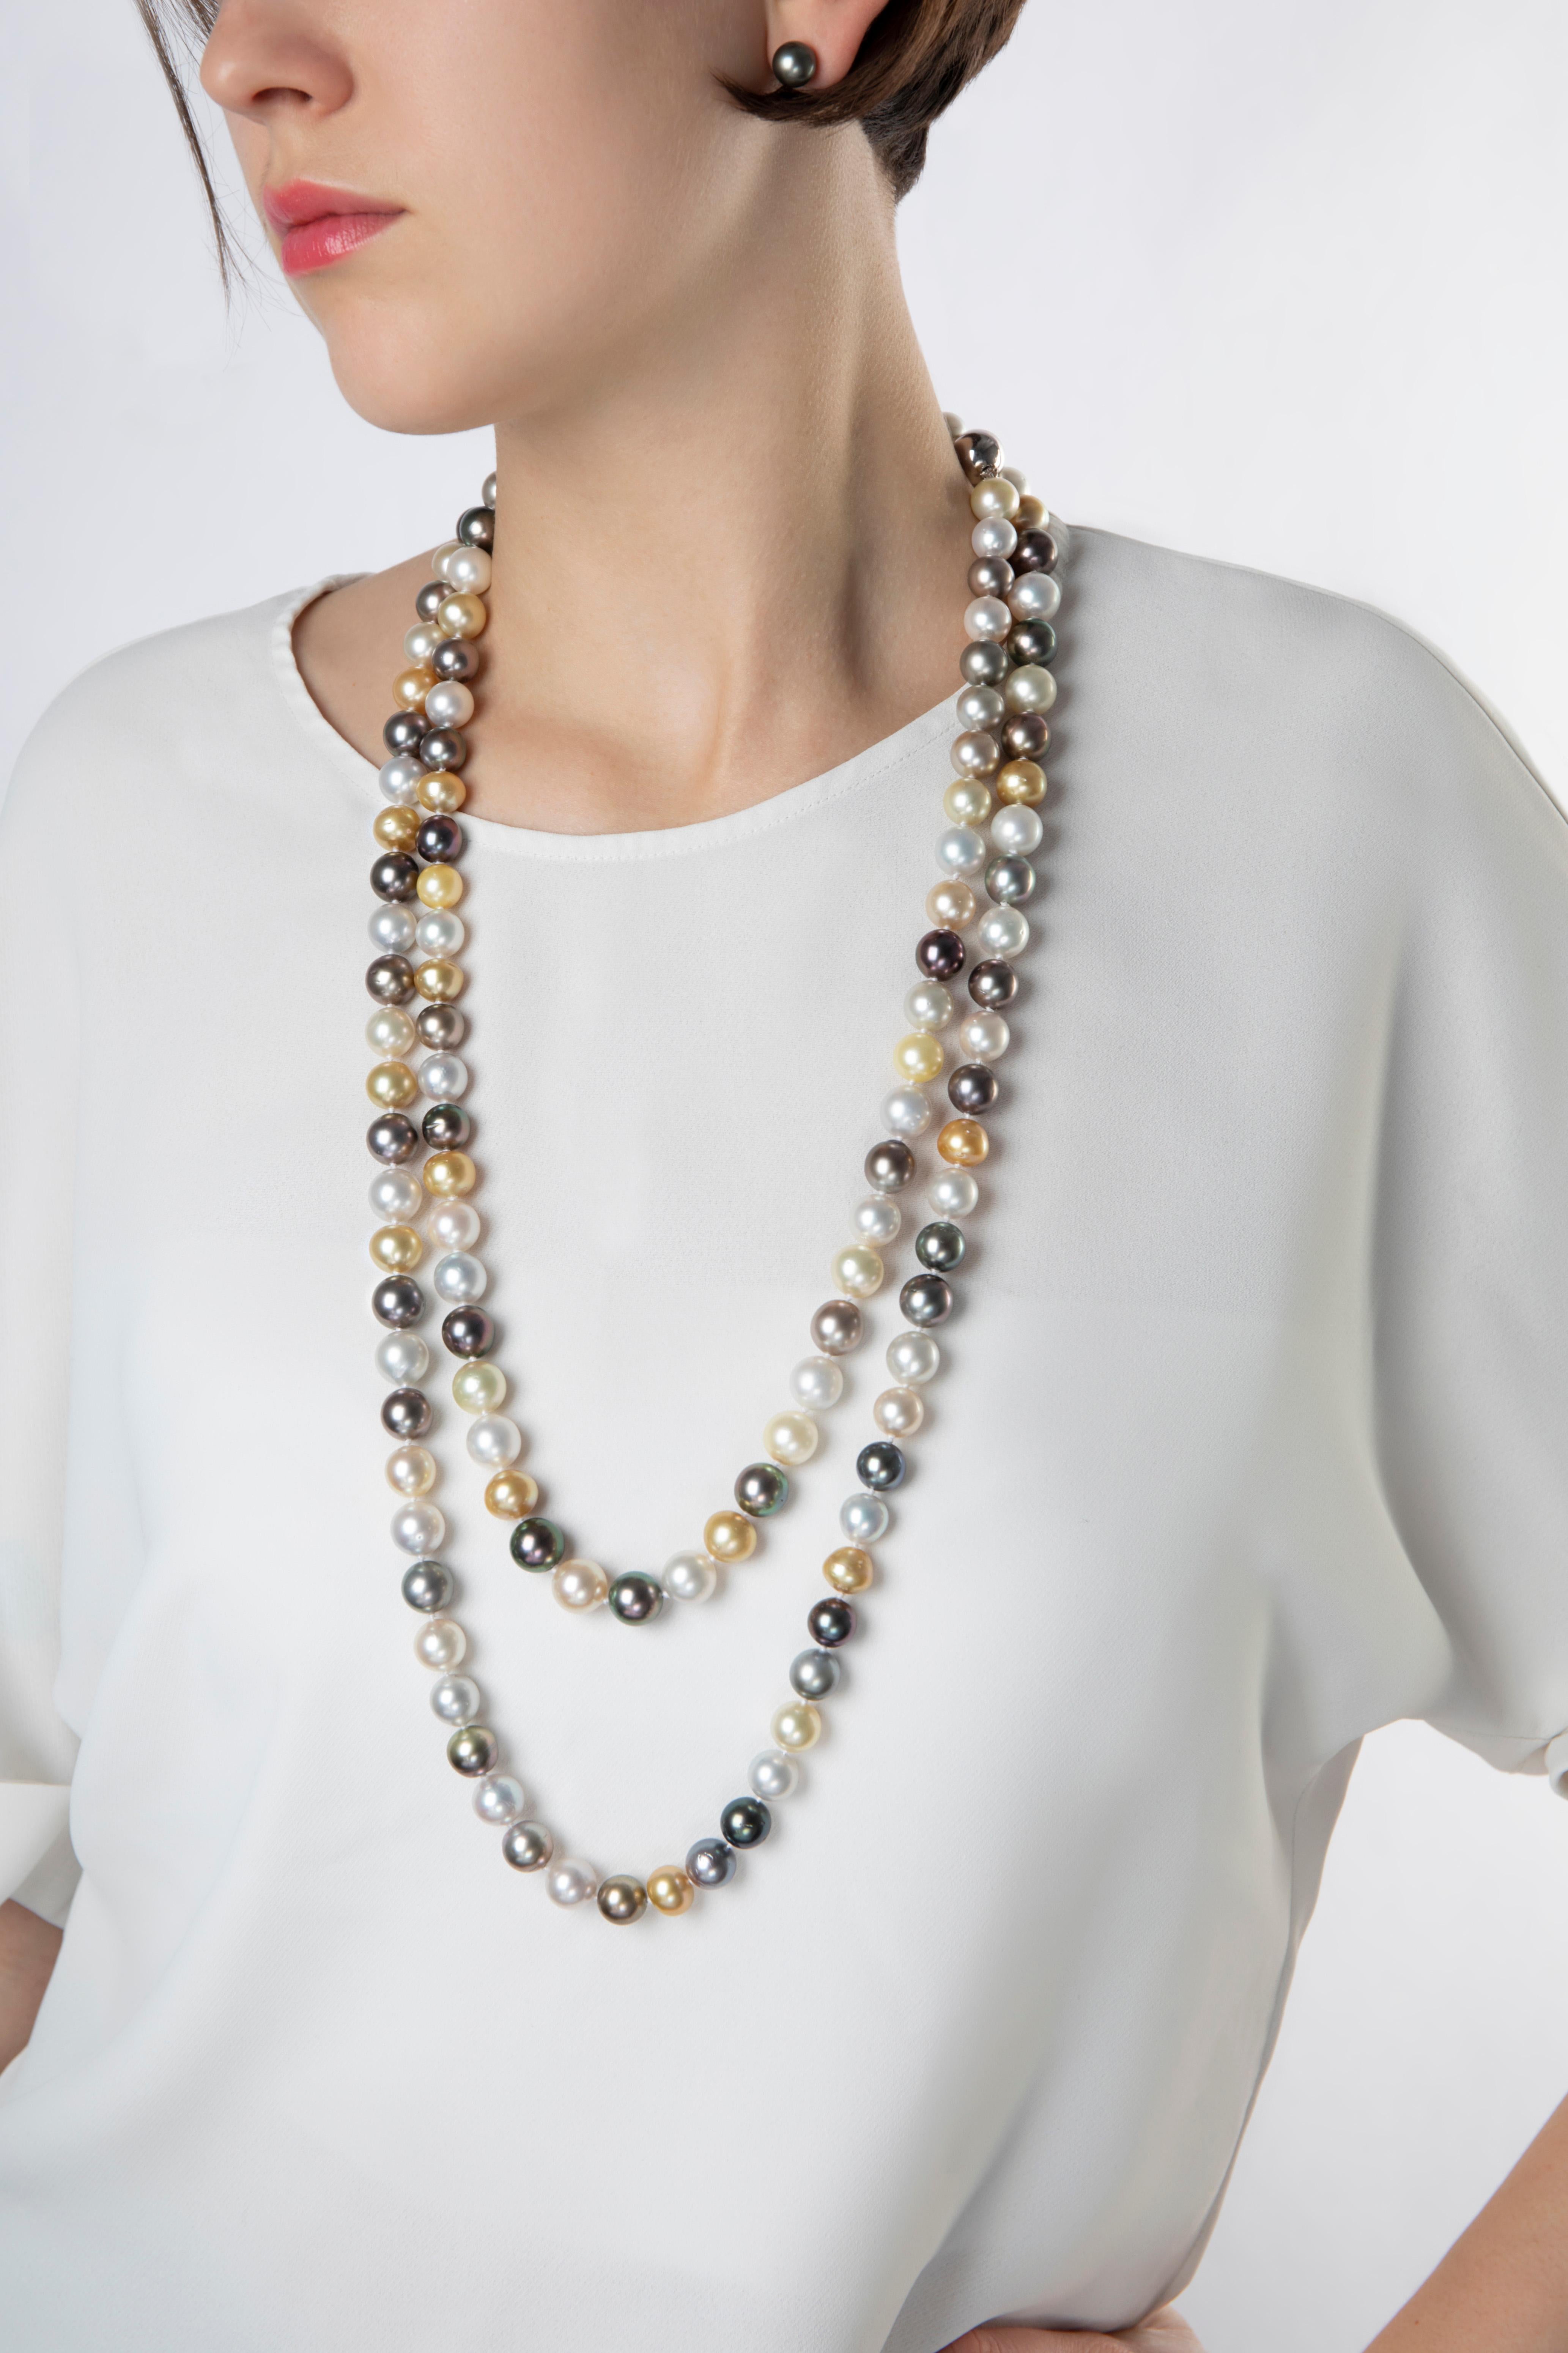 A sumptuous mix of naturally coloured pearls, this long necklace by Yoko London is sure to be cherished by all who enjoy wearing jewellery as a bold statement. Each pearl has been hand-selected by our artisans to deliver a harmonious sequence of